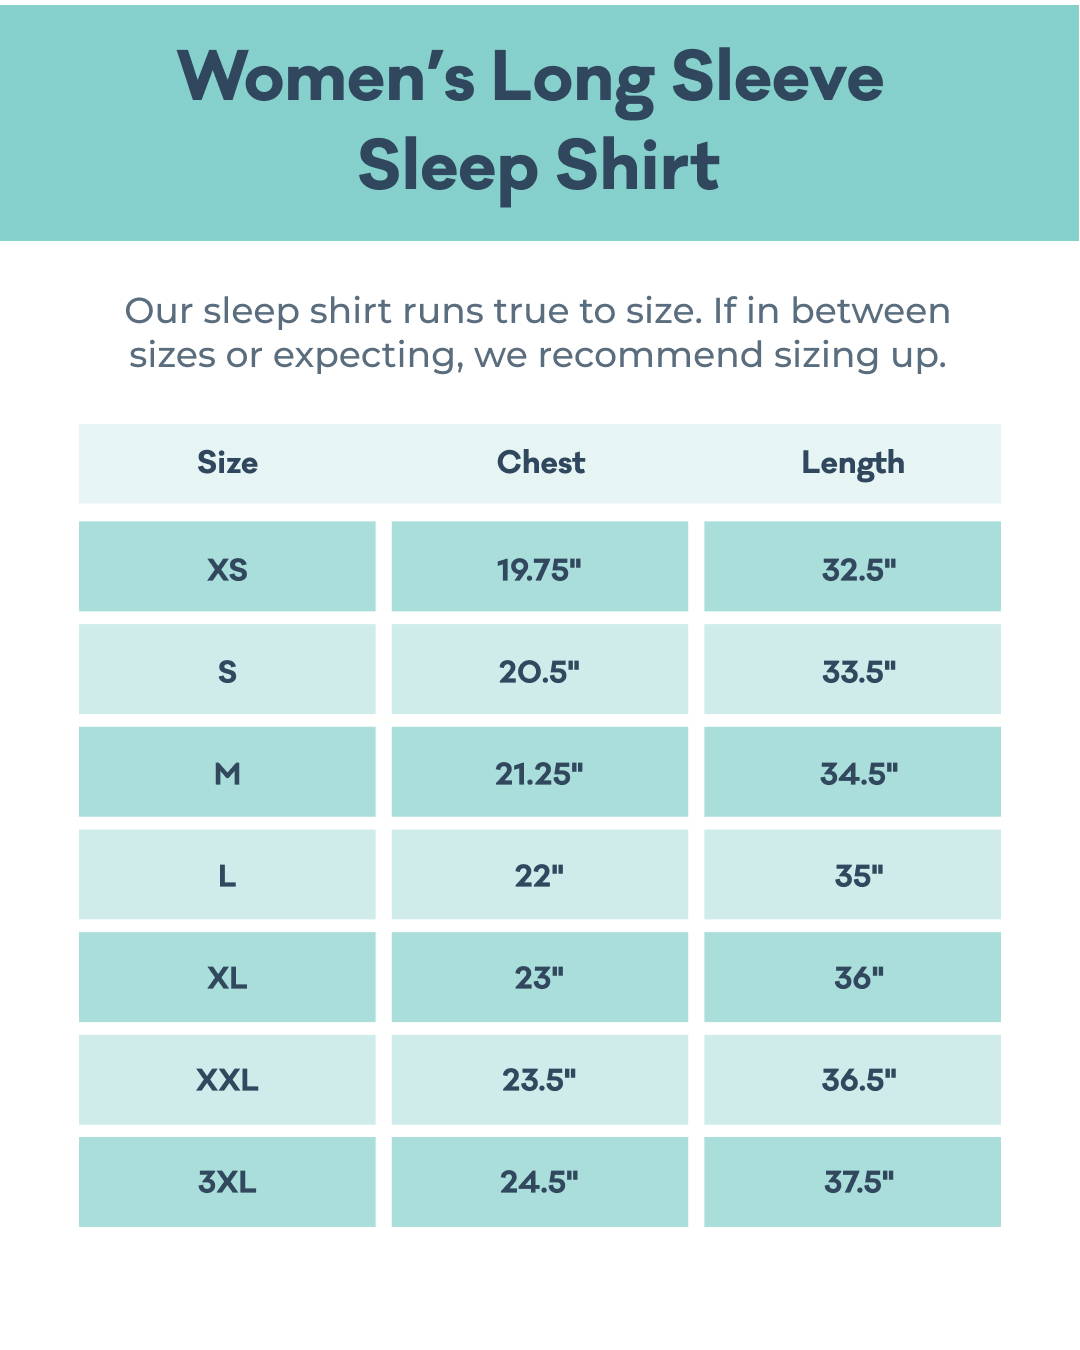 Women's Long Sleeve Sleep Shirt Size Chart: size XS(0-2) 32.5in length and 19.75in chest; size S(4-6) 33.5in length and 20.5in chest; size M(8-10) 34.5in length and 21.25in chest, size L(12-14) 35in length and 22in chest; size XL(16-18) 36in length and 23in chest; size XXL(20-22) 36.5in length and 23.5in chest; size 3XL(24-26) 37.5in length and 24.5in chest.